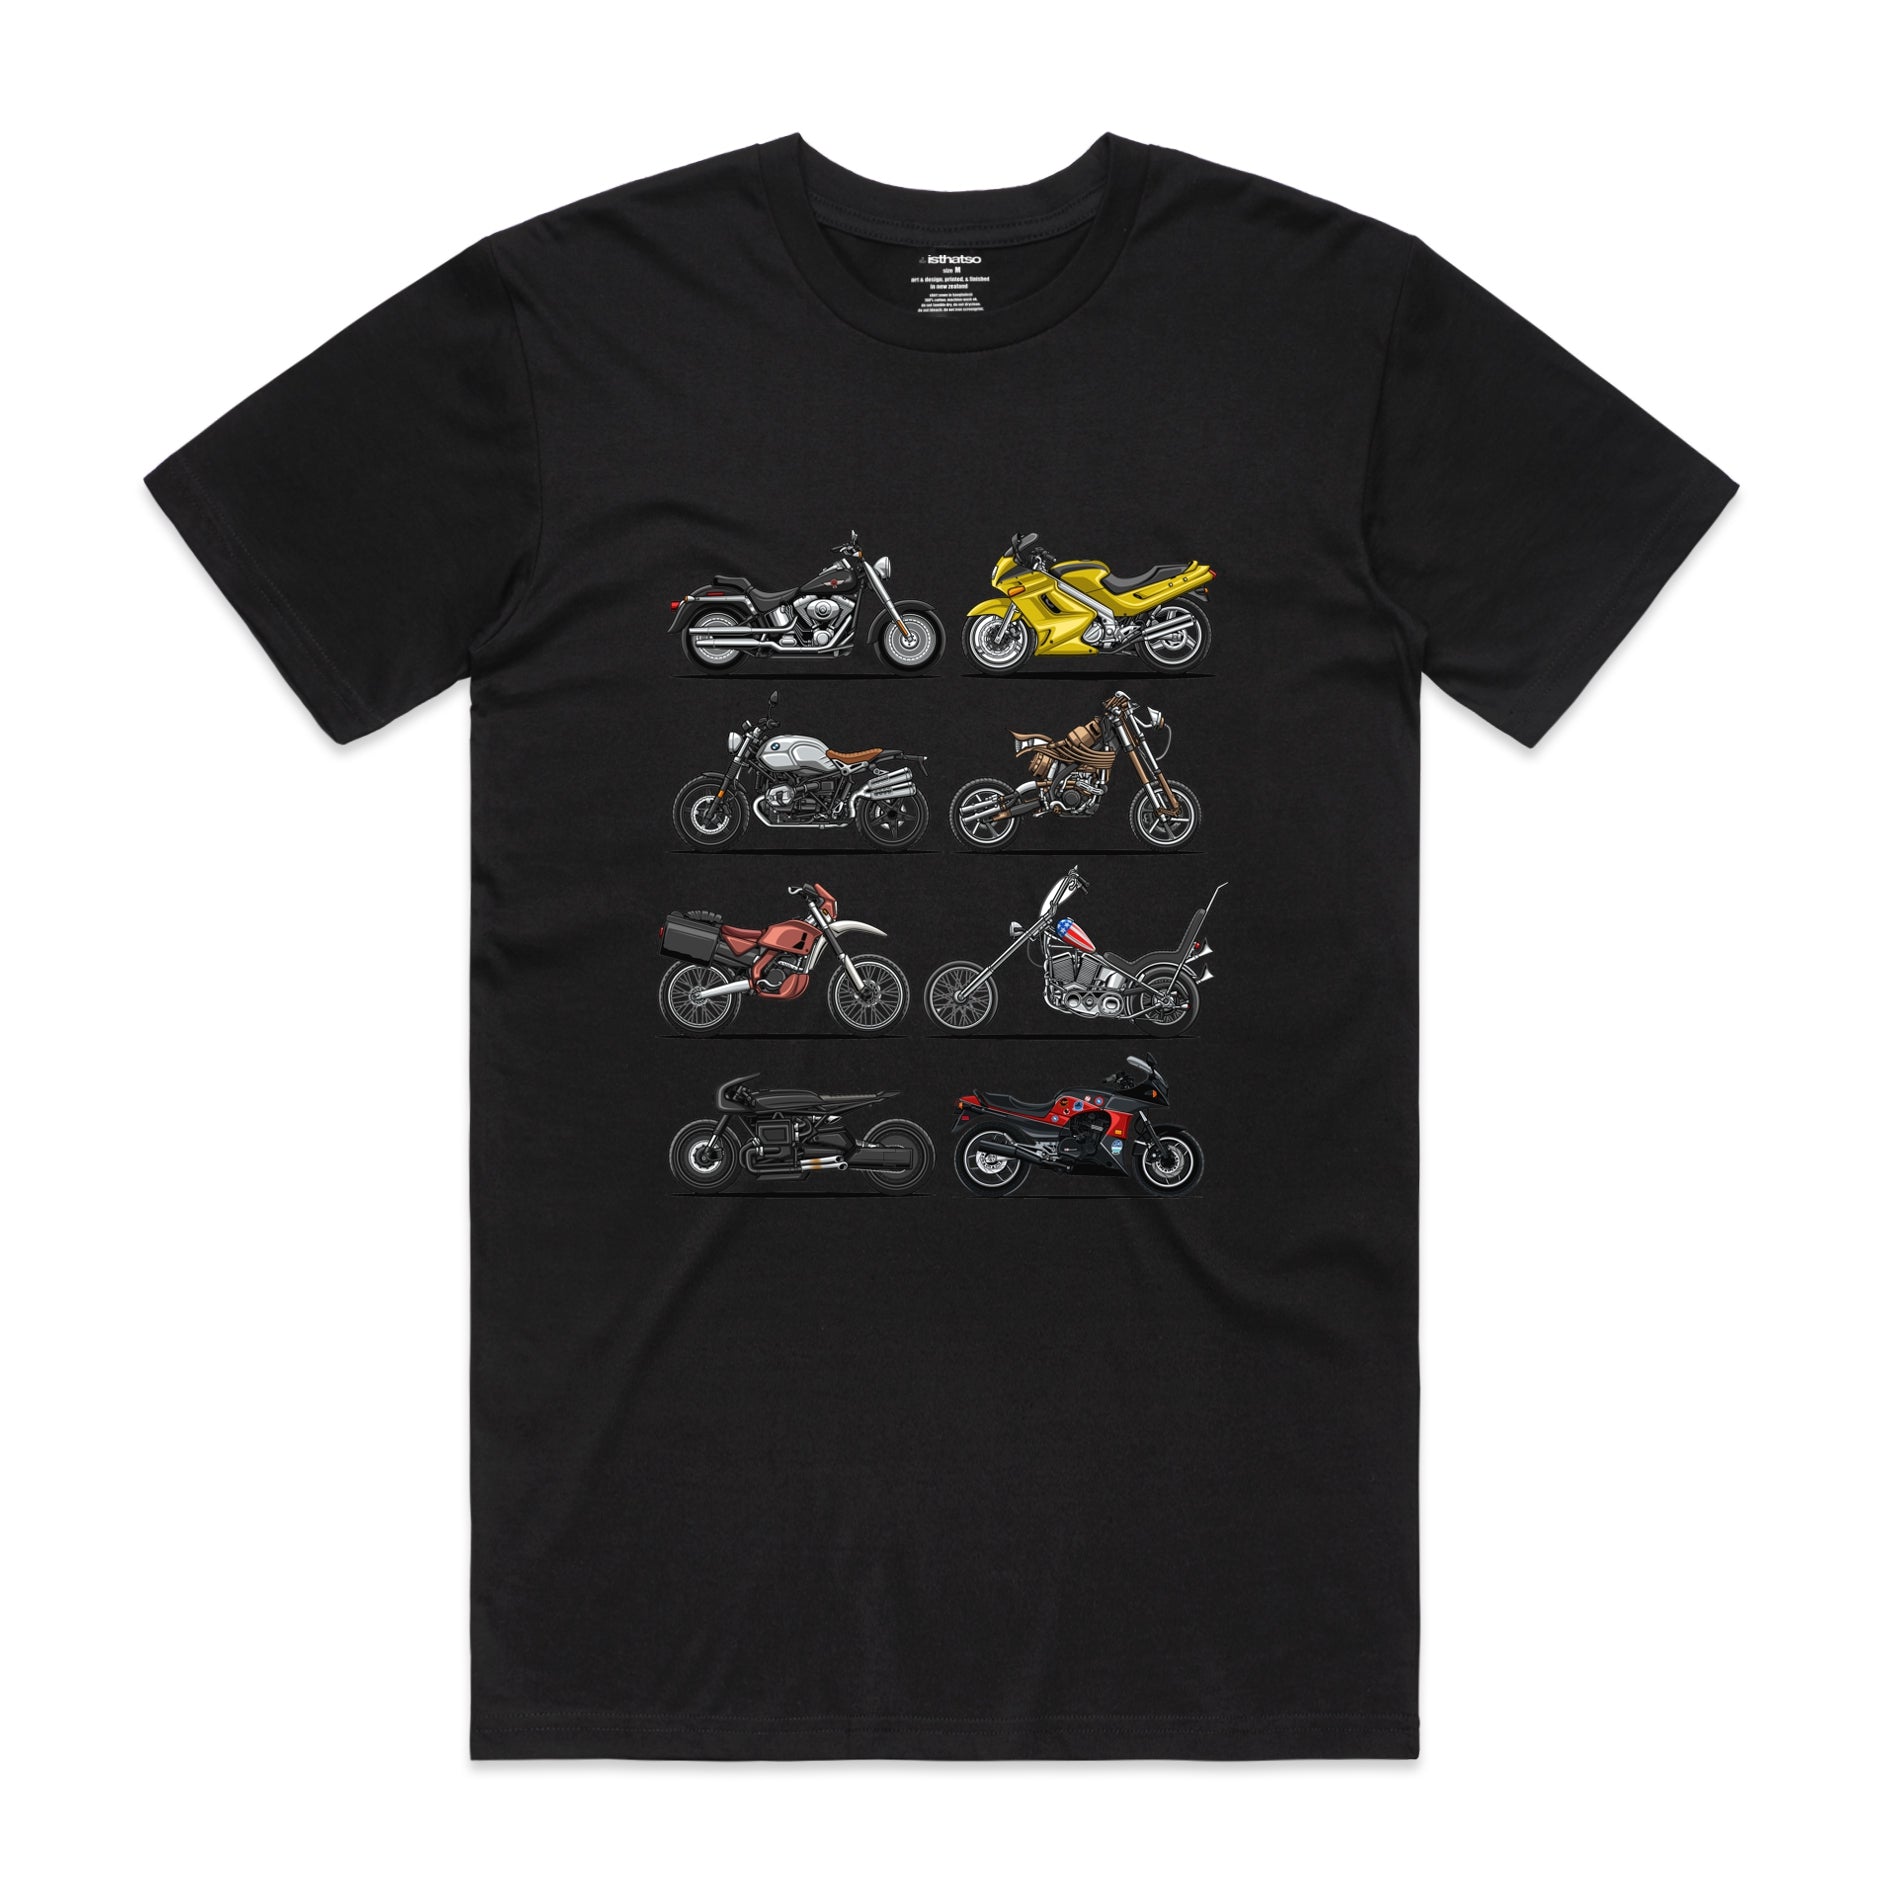 Isthatso - Movie Motorcycles SS Tee - Black